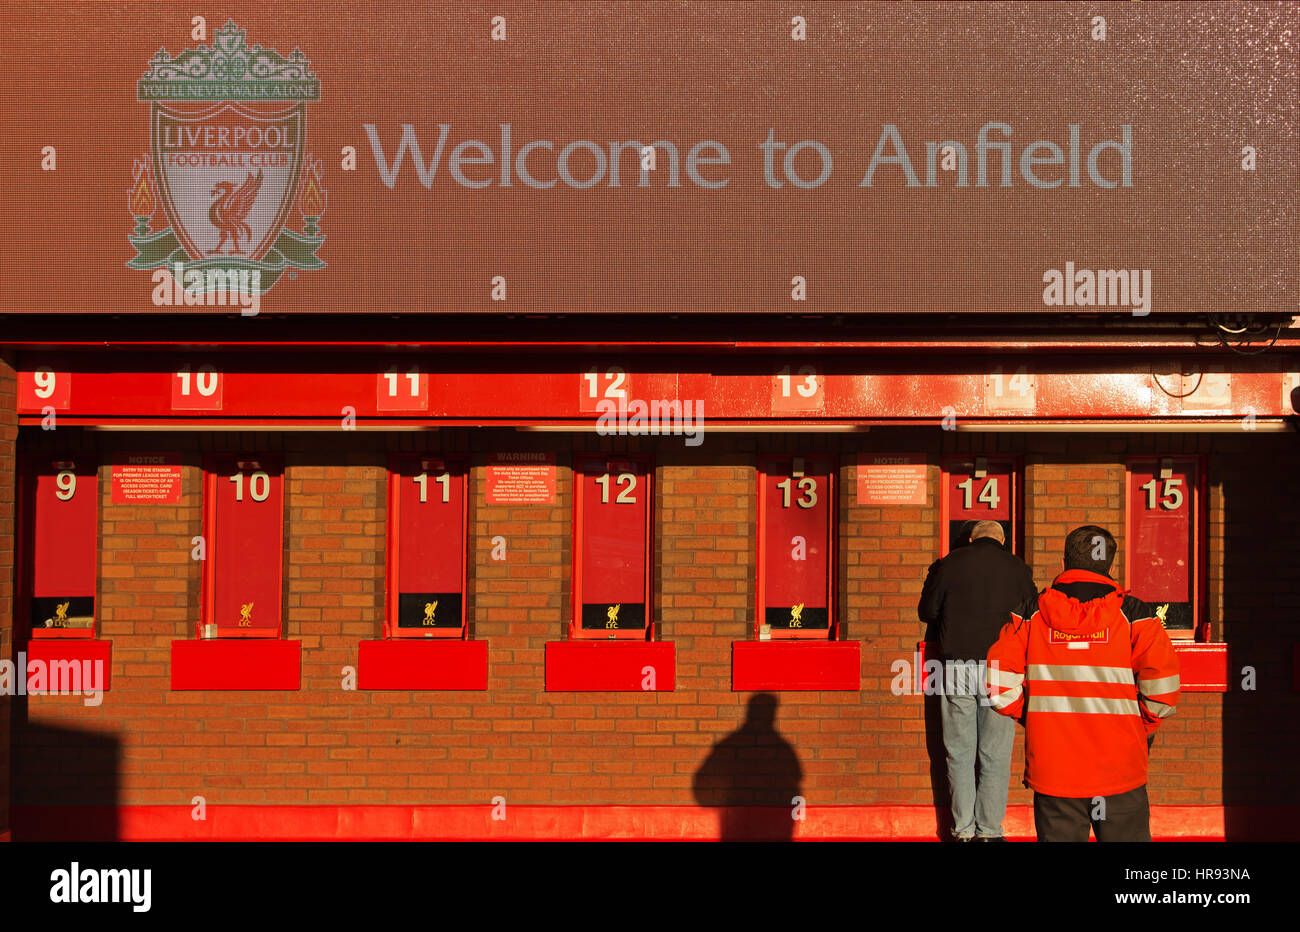 Welcome to Anfield sign and people buying tickets at Liverpool Football  Club Stadium. Liverpool UK Stock Photo - Alamy